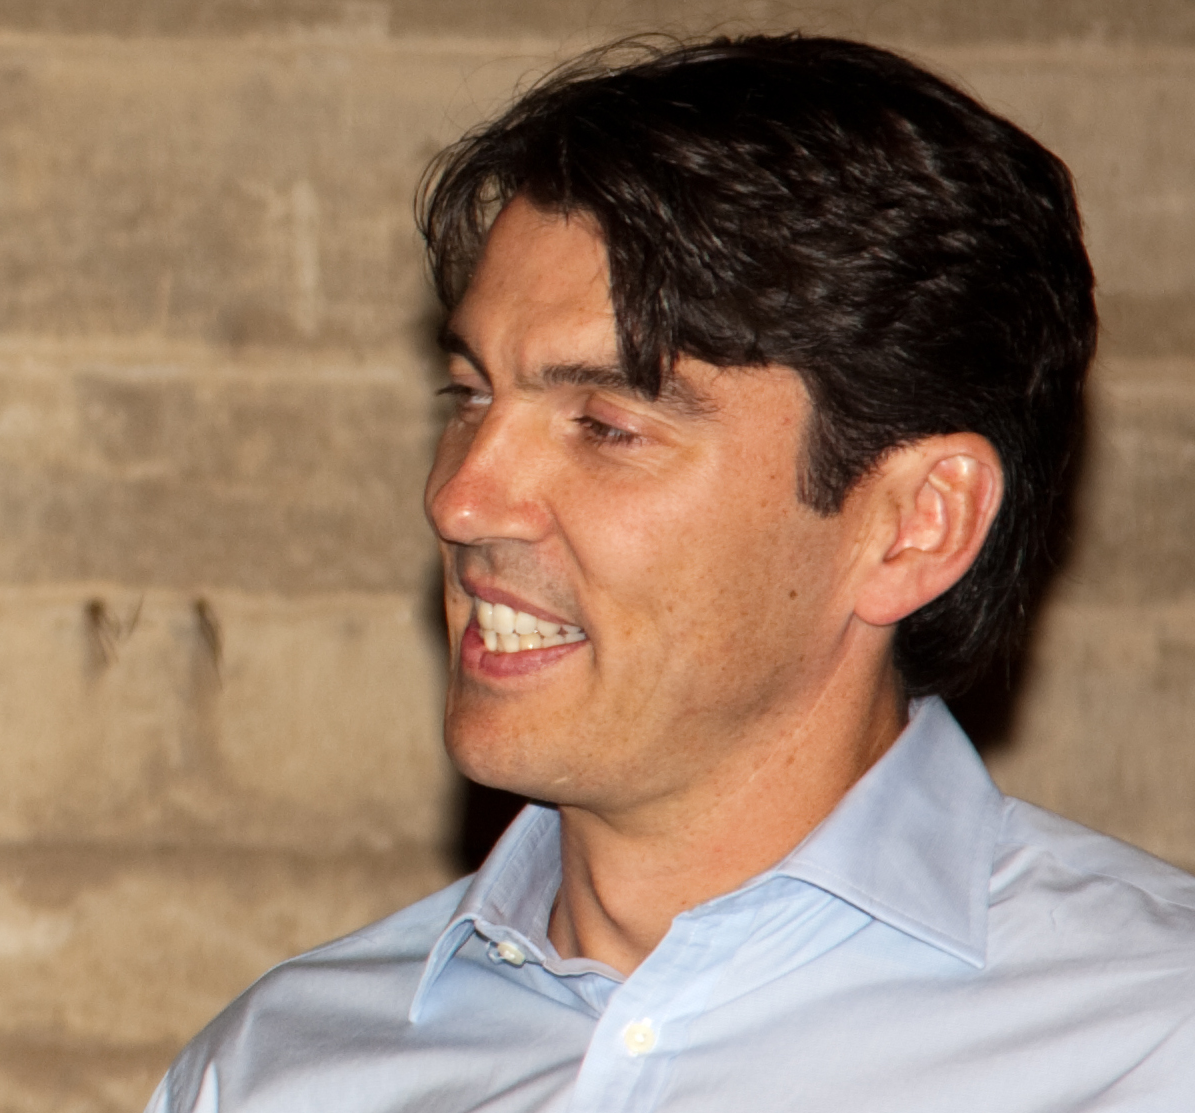 In August of 2013, I witnessed AOL CEO Tim Armstrong fire someone in front of 1,000 of their colleagues. Credit: Yaniv Golan, Wikipedia Commons